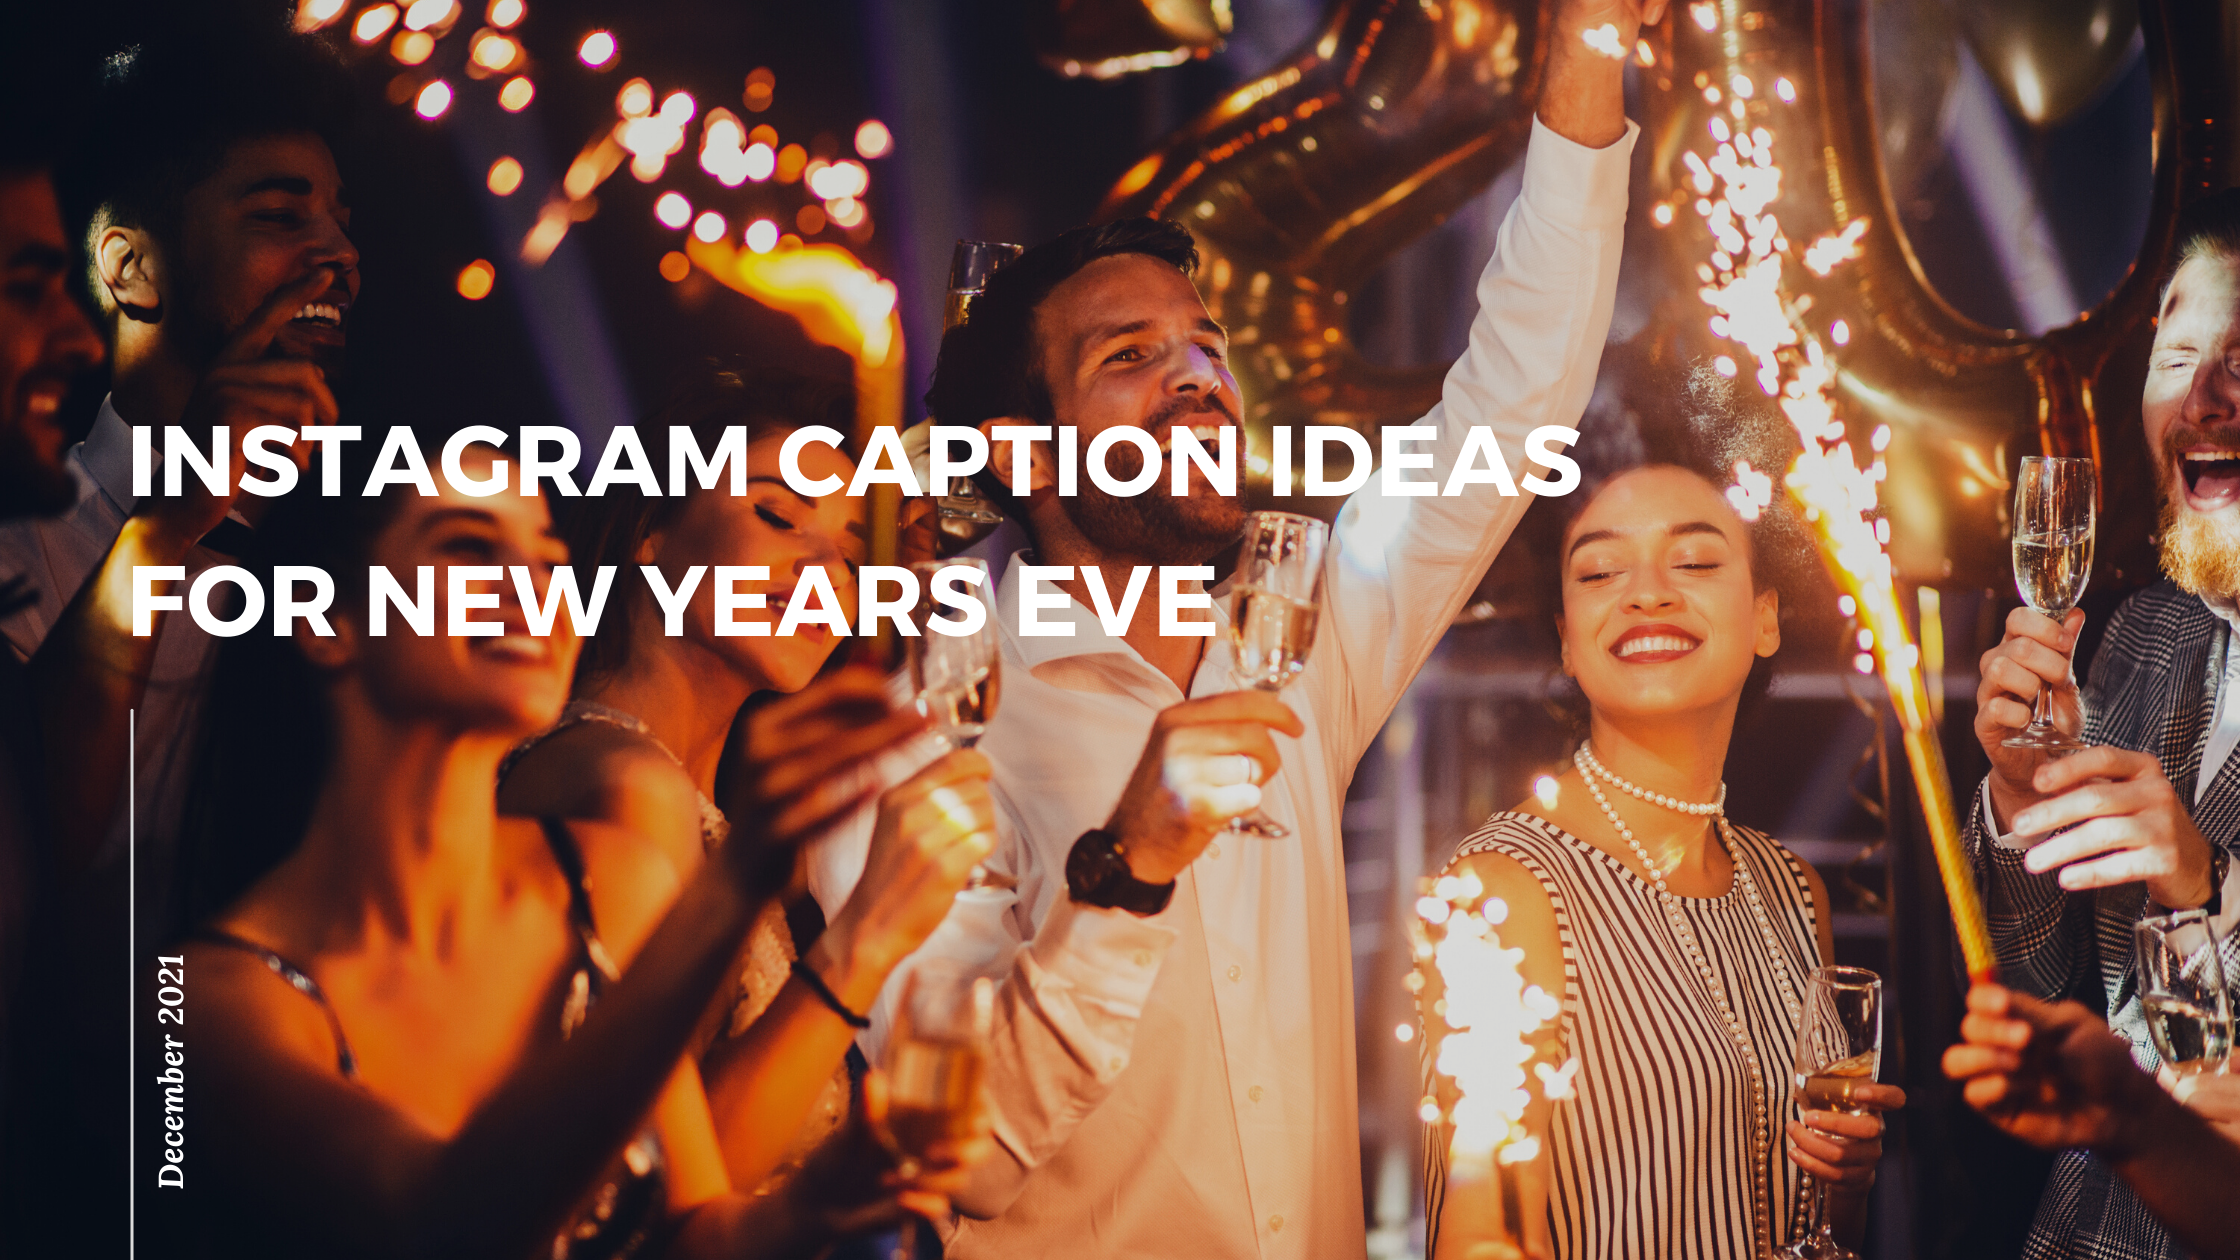 Instagram Caption Ideas for New Years Eve